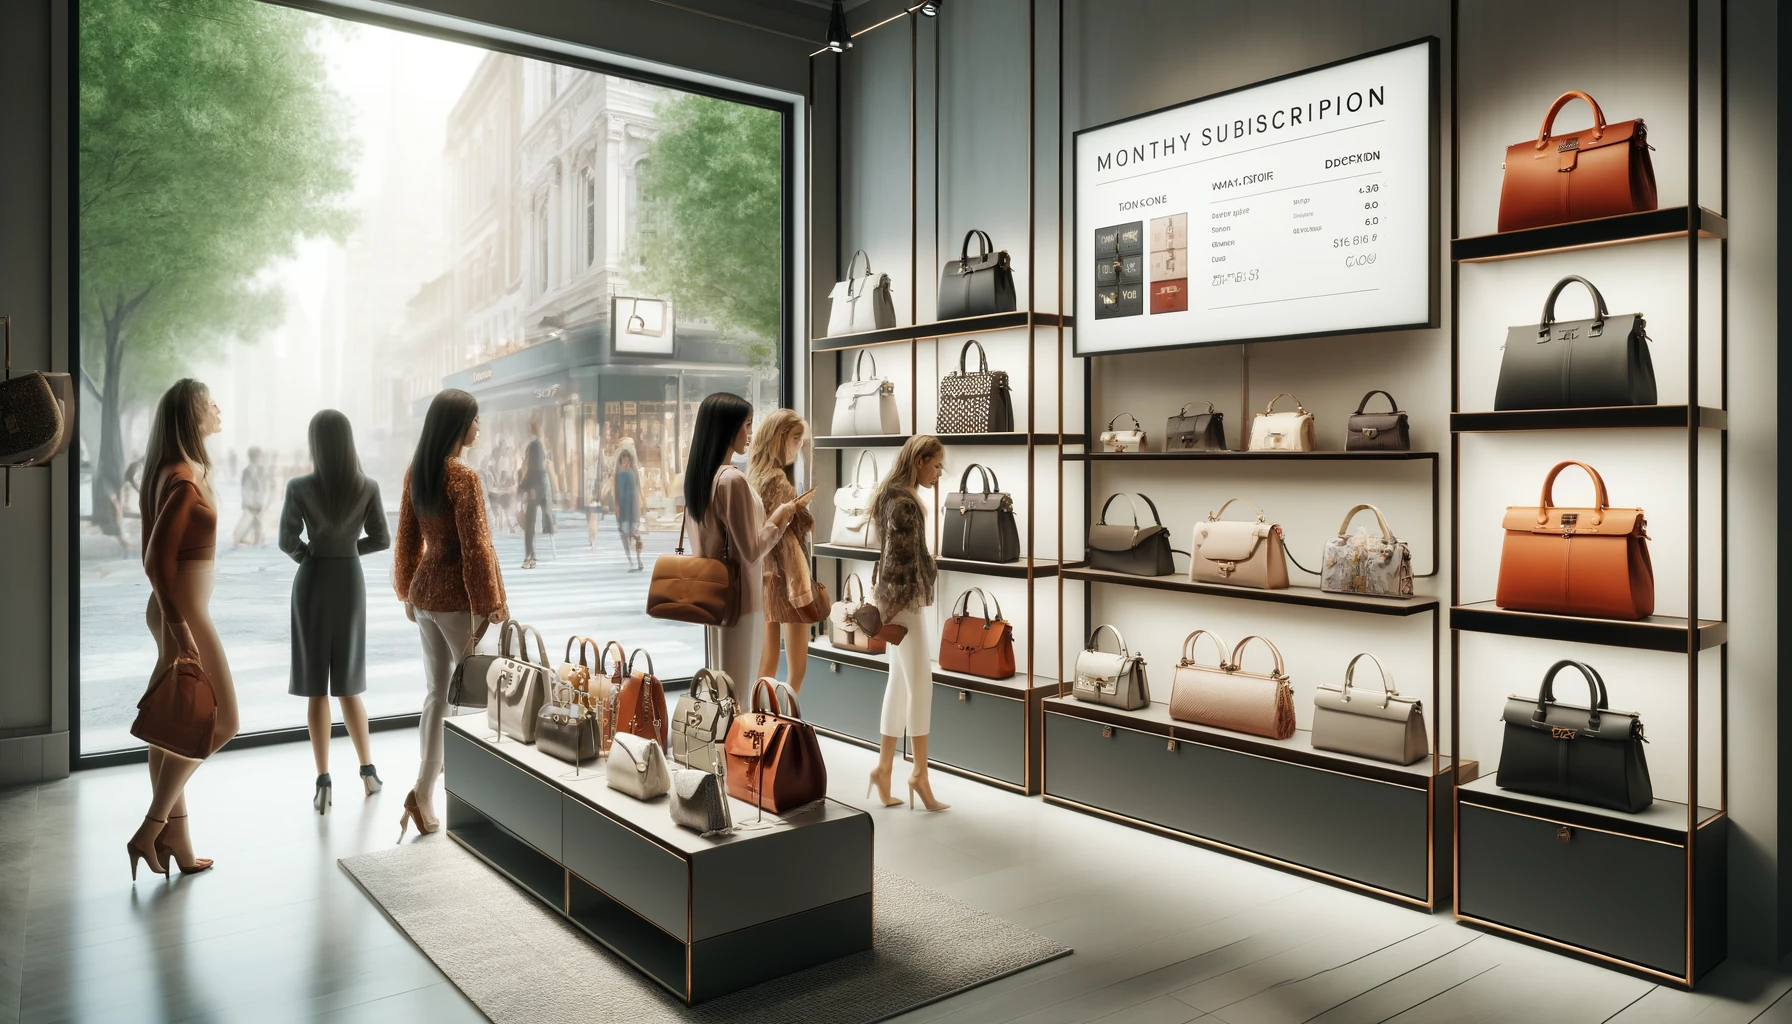 A modern city boutique showcasing a monthly subscription service for brand-name handbag rentals. The scene includes diverse stylish women browsing an array of luxury handbags displayed elegantly on sleek shelves. The interior is chic and minimalist, with soft lighting highlighting the premium leather goods. The store has a digital display showing subscription options and prices. Outside, a bustling city street adds a vibrant backdrop.